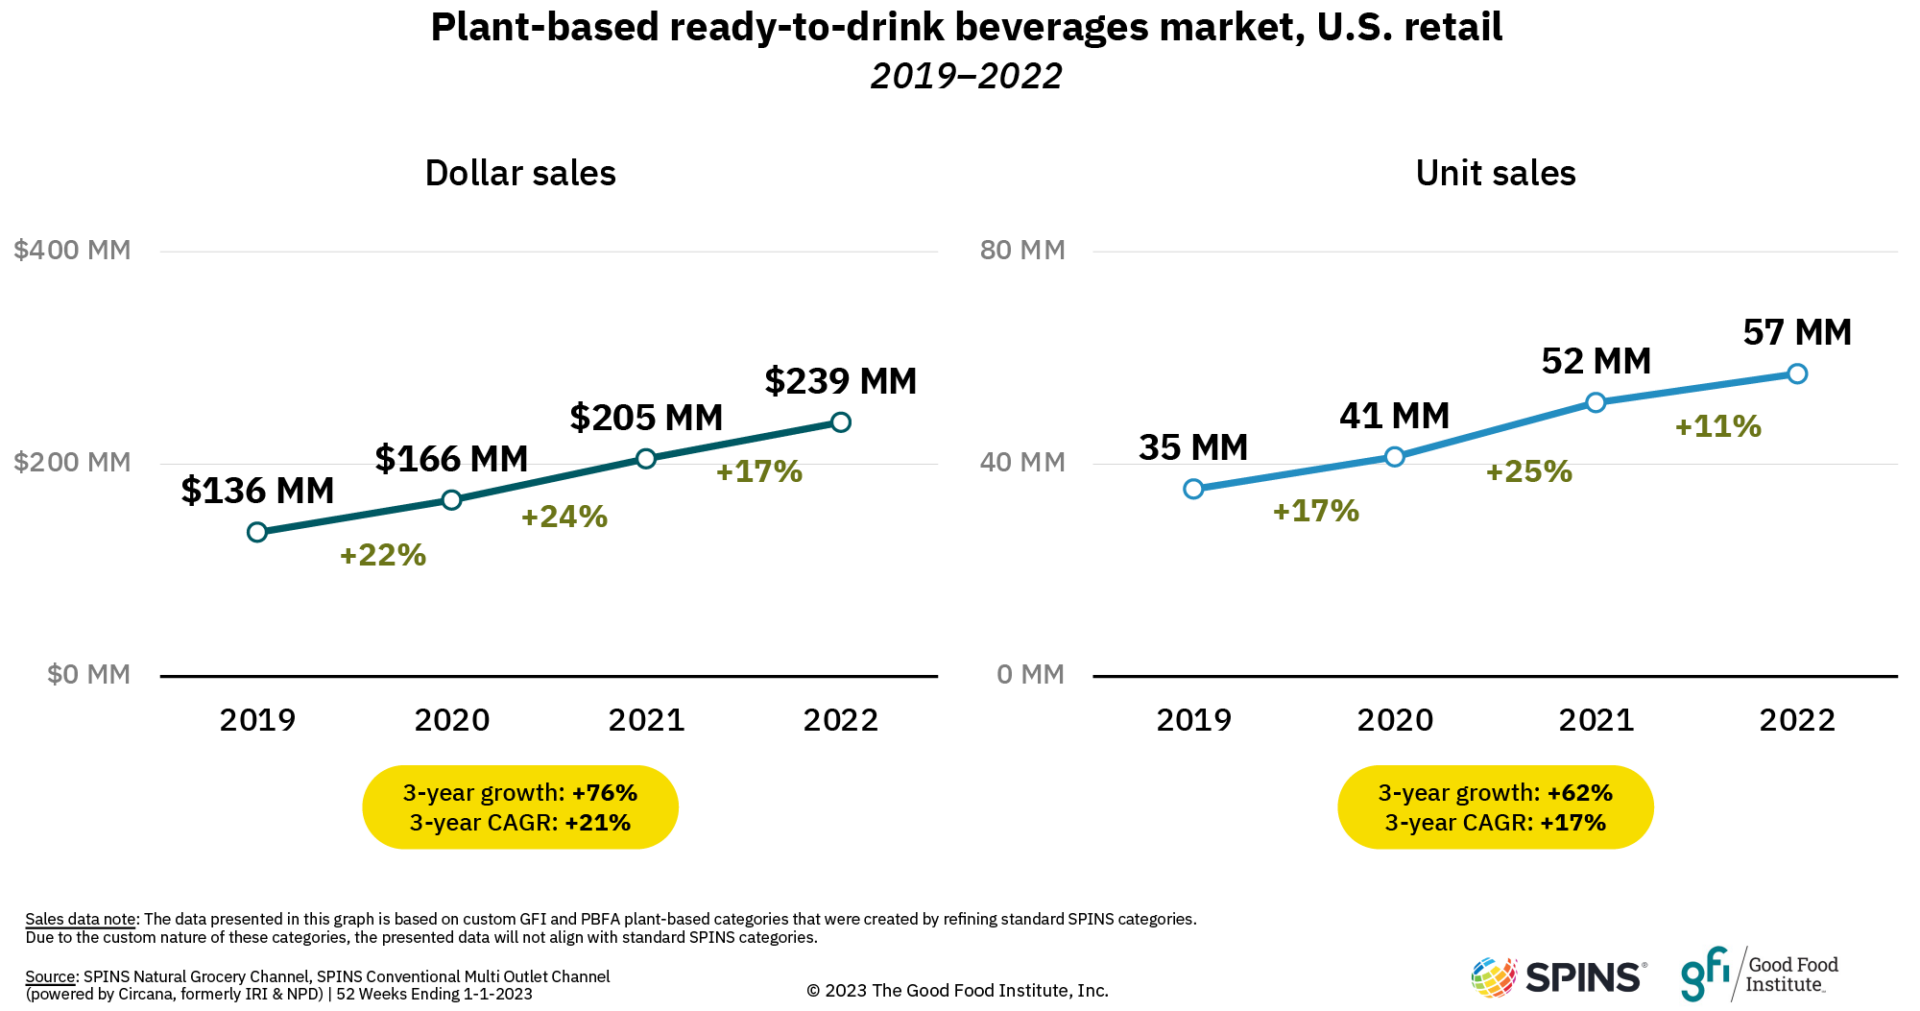 Summary of plant-based ready-to-drink beverages sales data